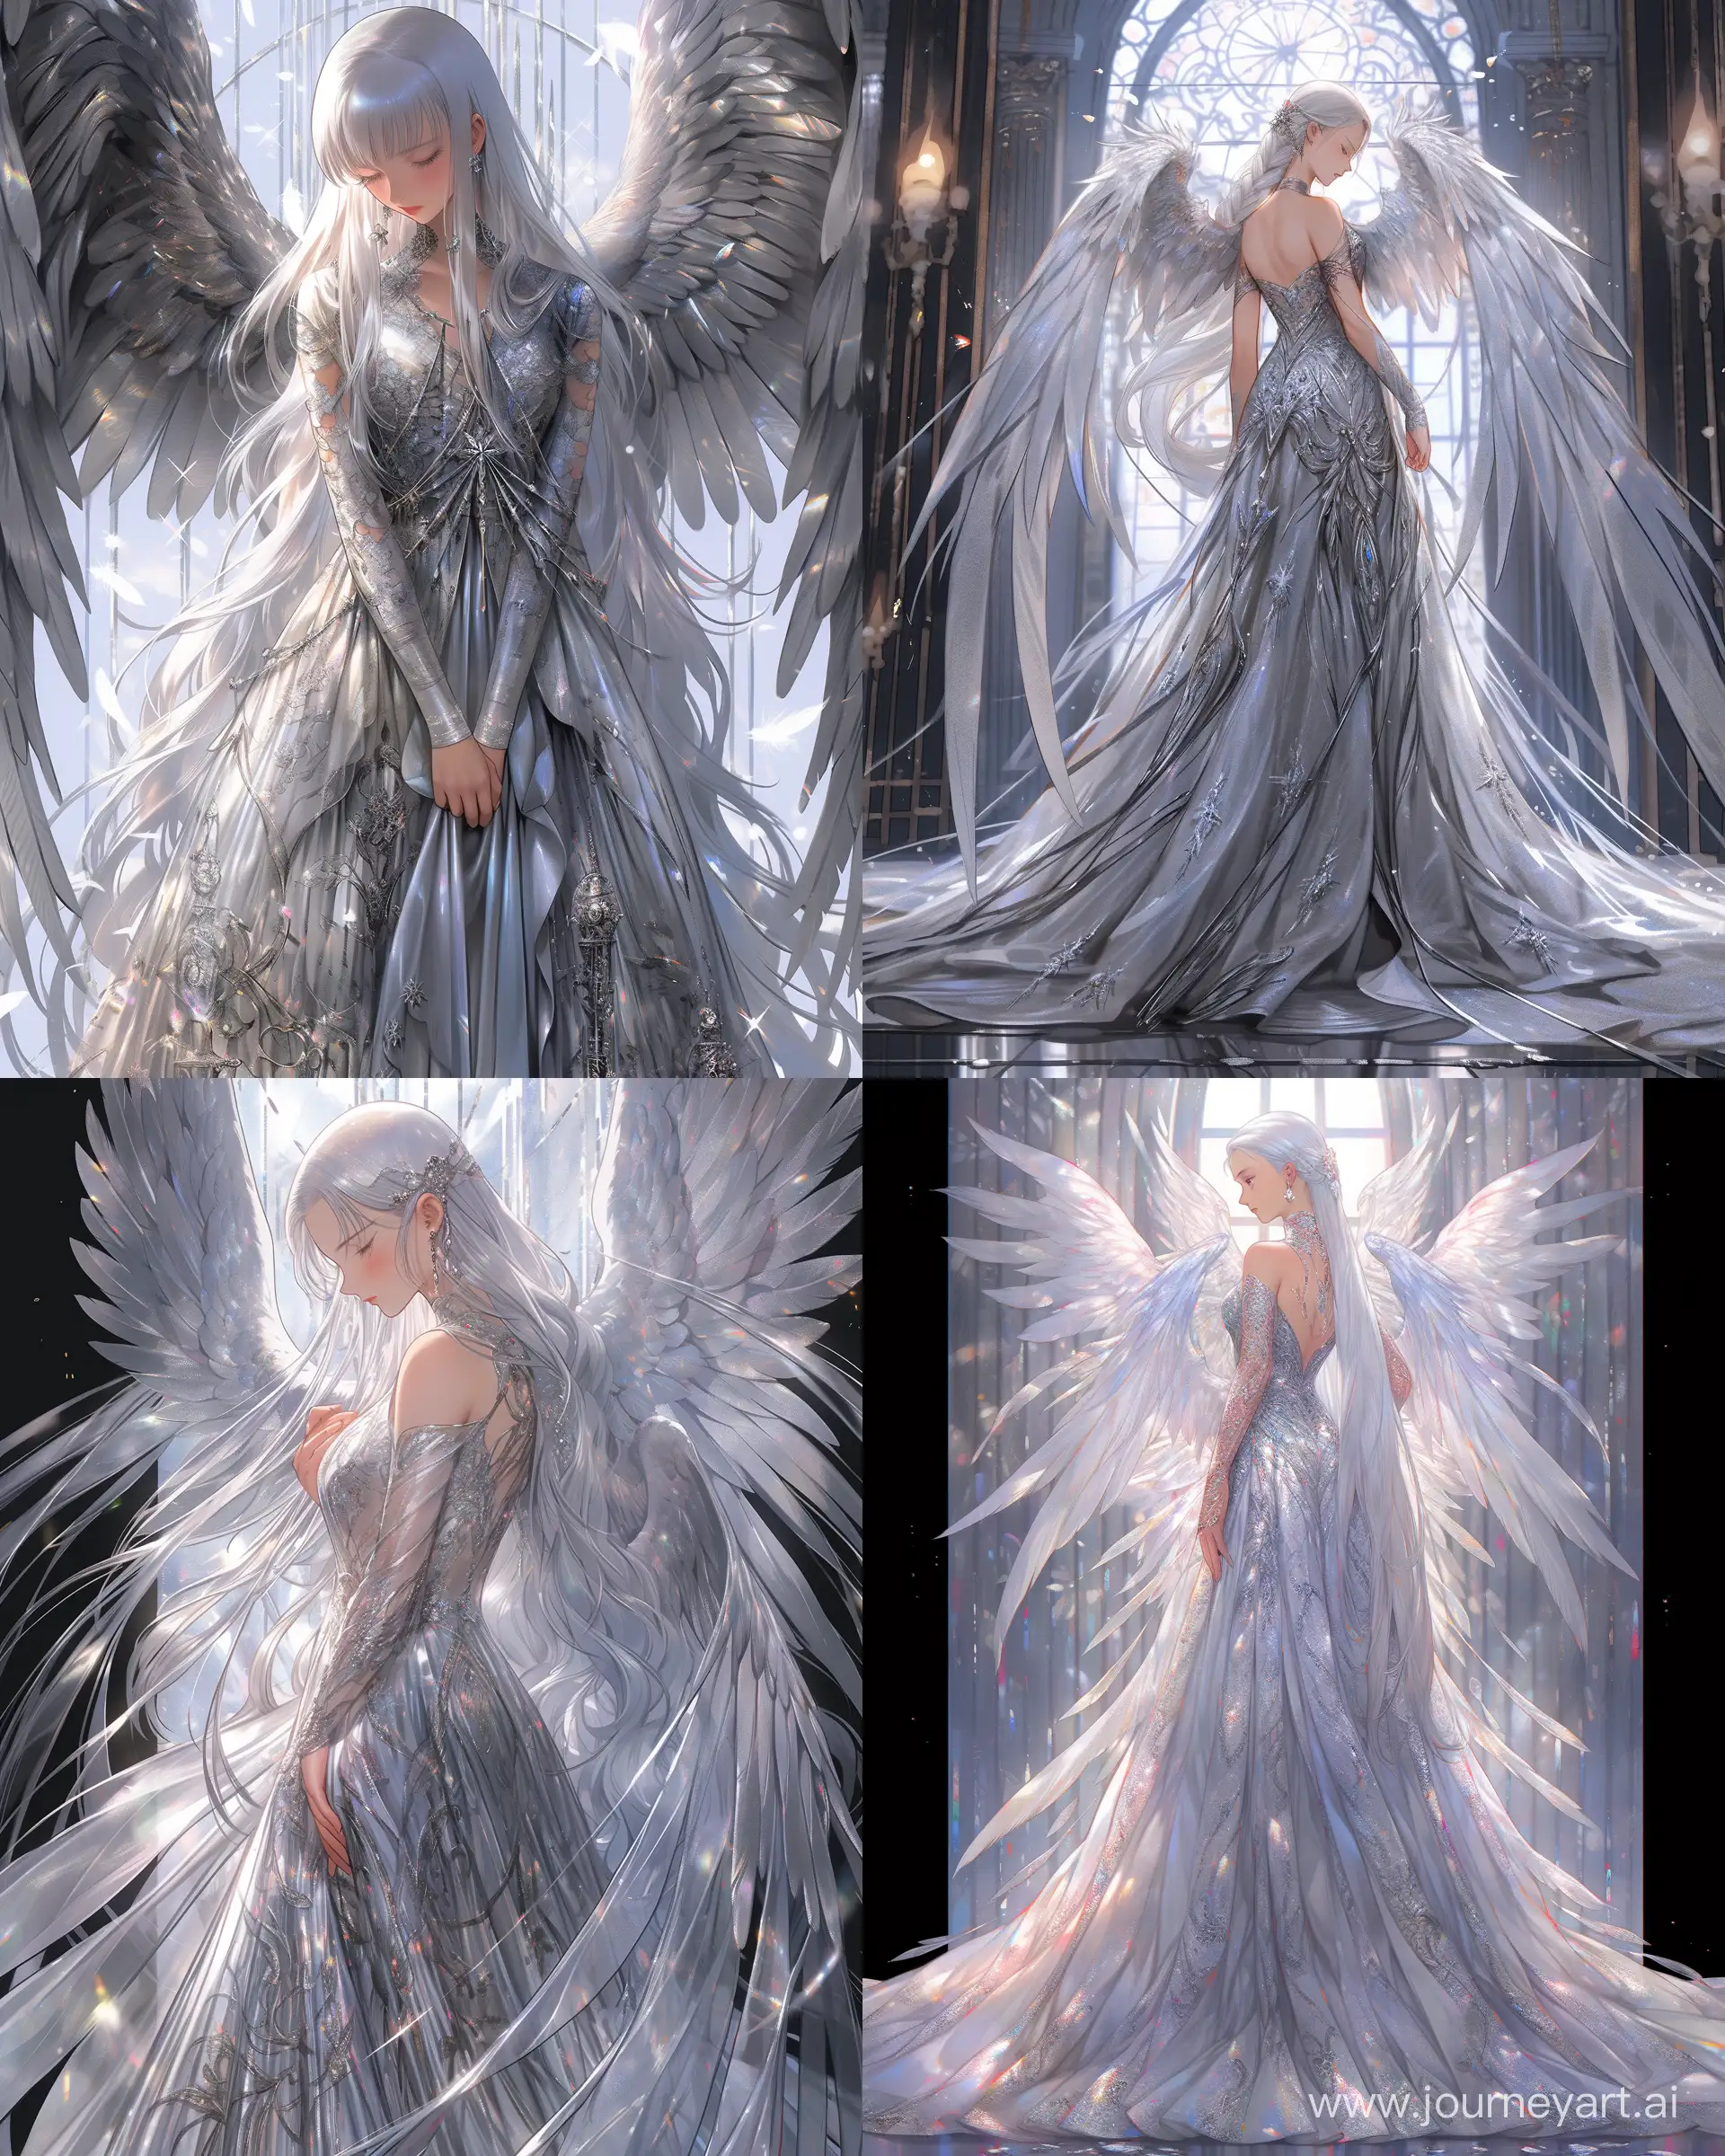 Celestial-Collaboration-Angelic-Encounter-with-a-Woman-in-Silver-Dress